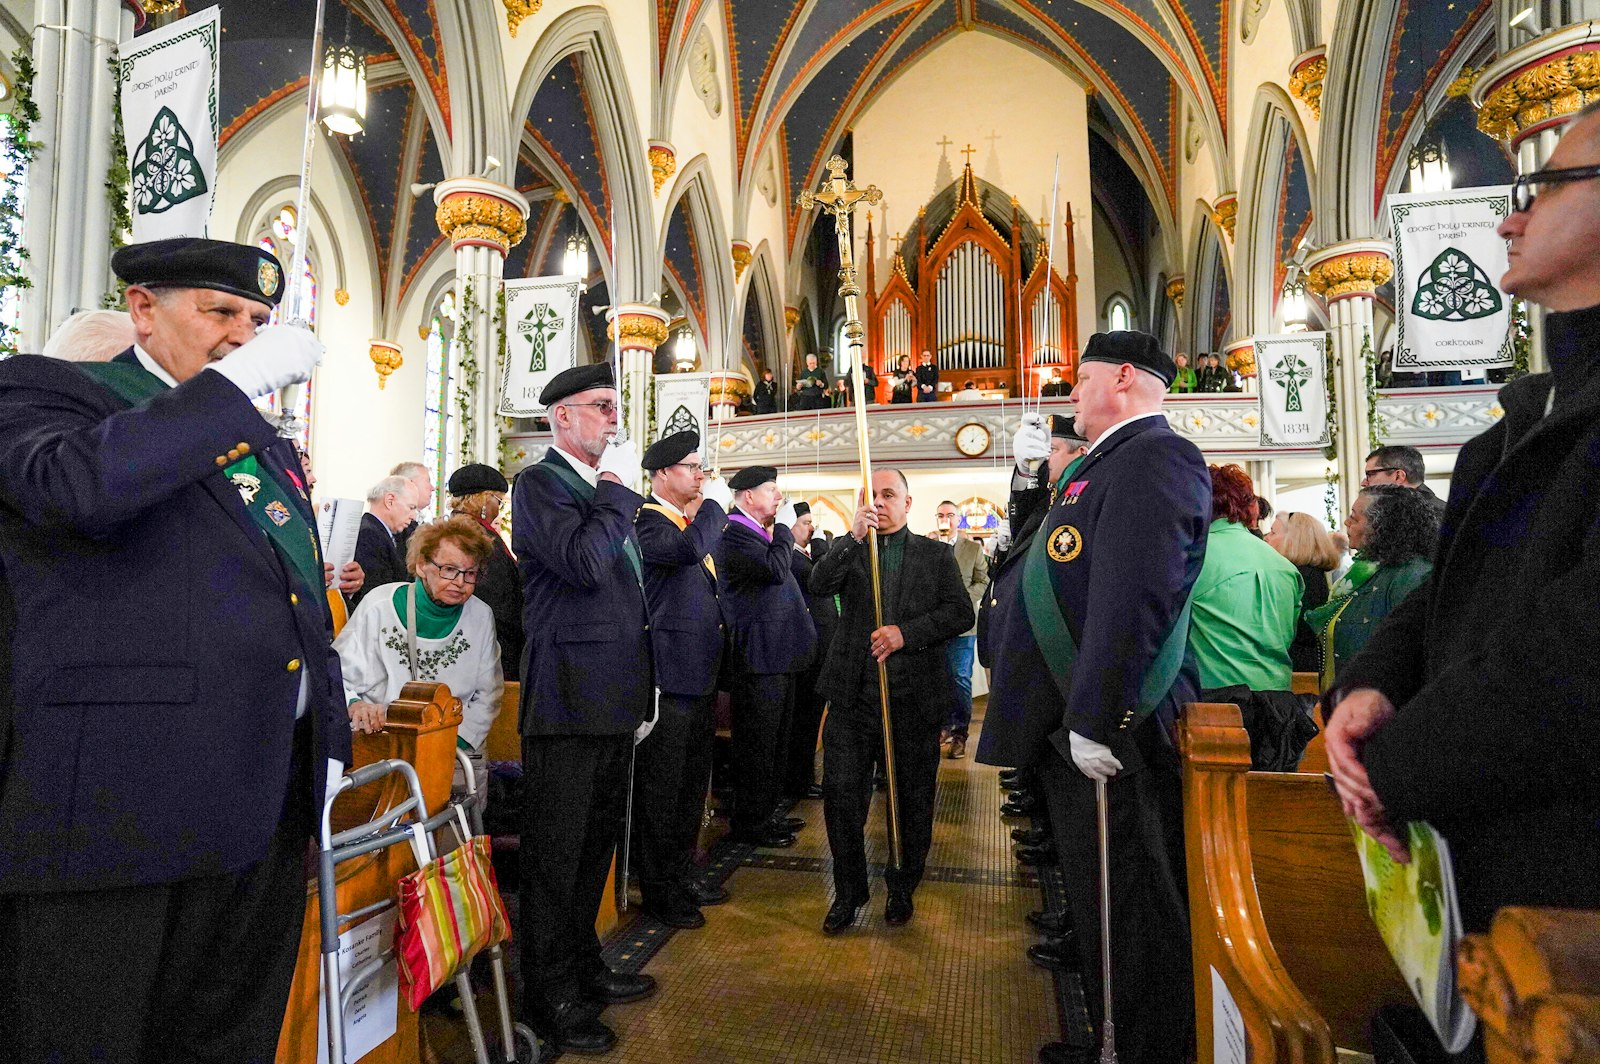 One of the city's oldest Catholic celebrations, the St. Patrick's Day Mass at Most Holy Trinity hearkens back to the parish's founding by Irish immigrants in the 1830s.